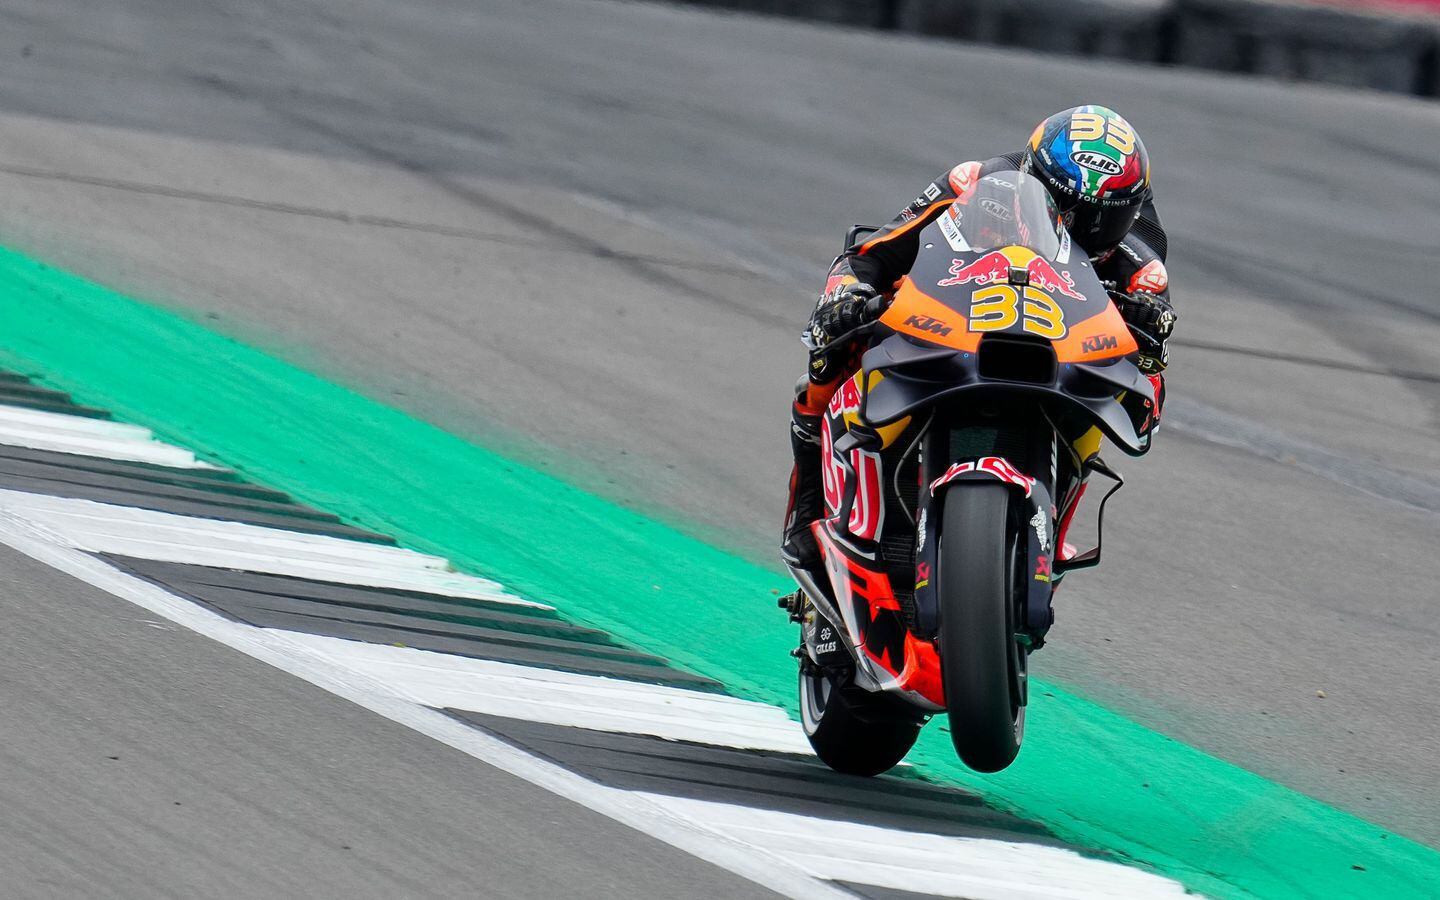 Brad Binder fended off a hard-charging Miguel Oliveira for the final podium spot on Sunday.